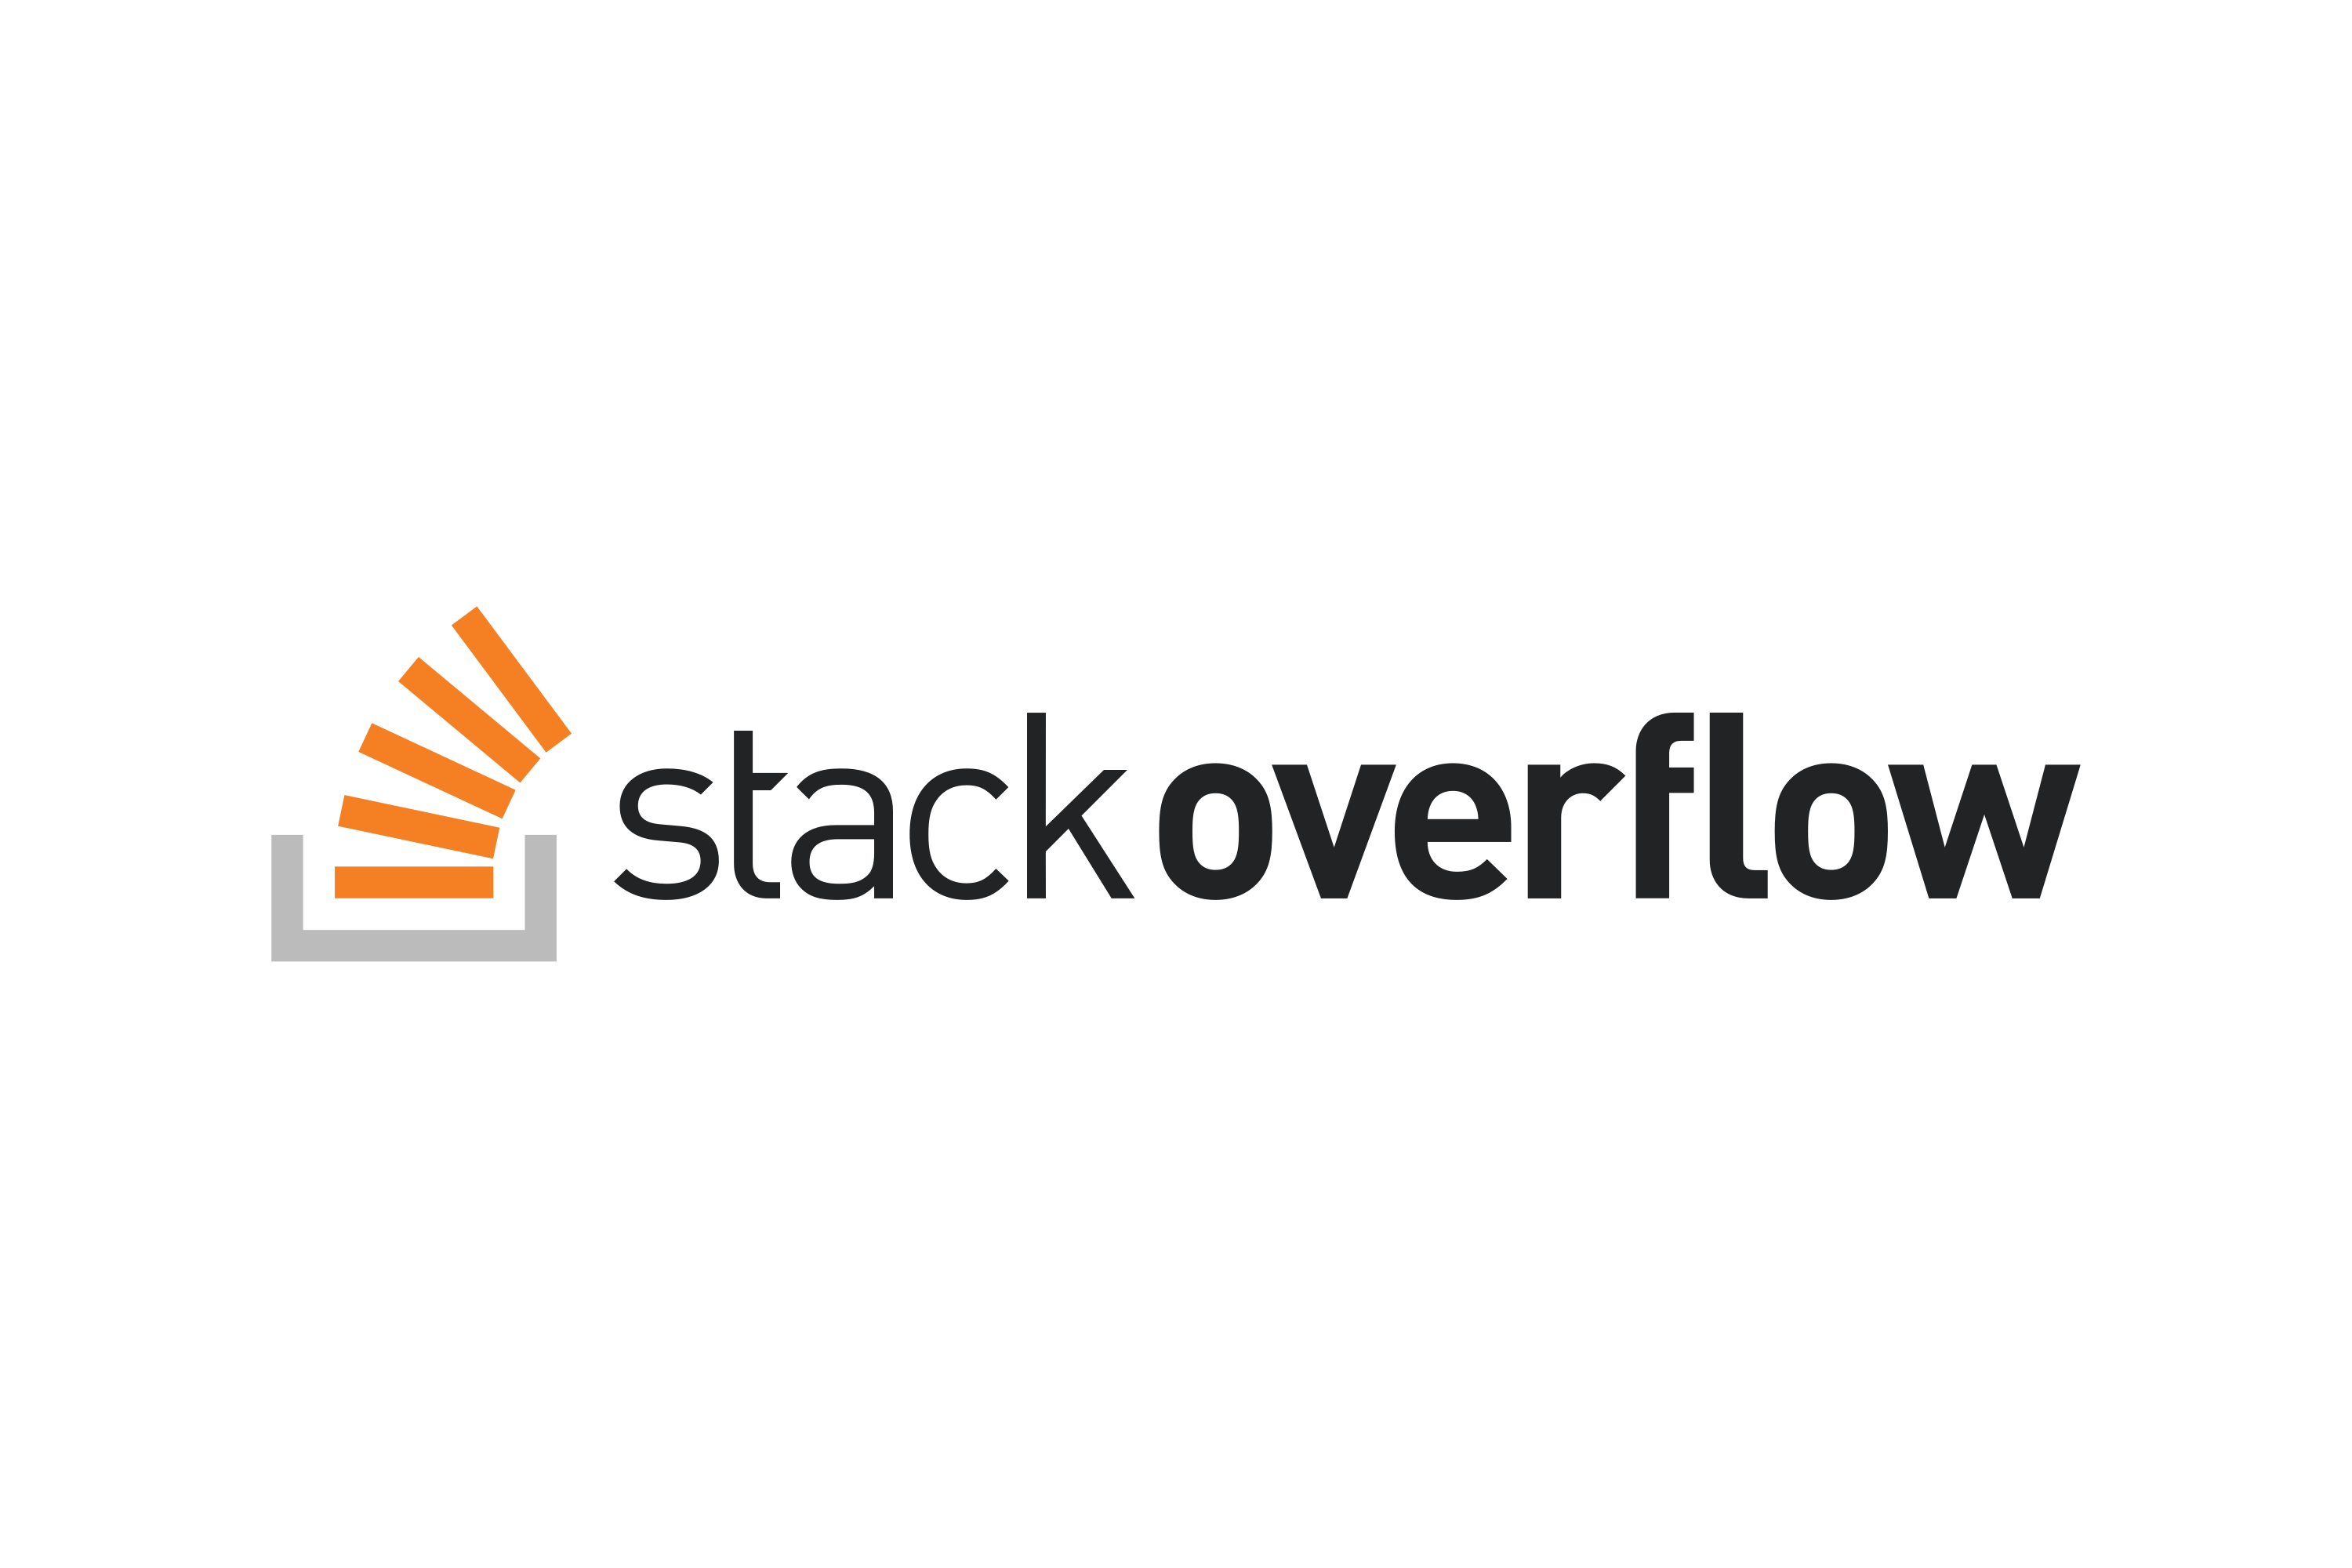 Introducing the Overflow Offline project - Stack Overflow